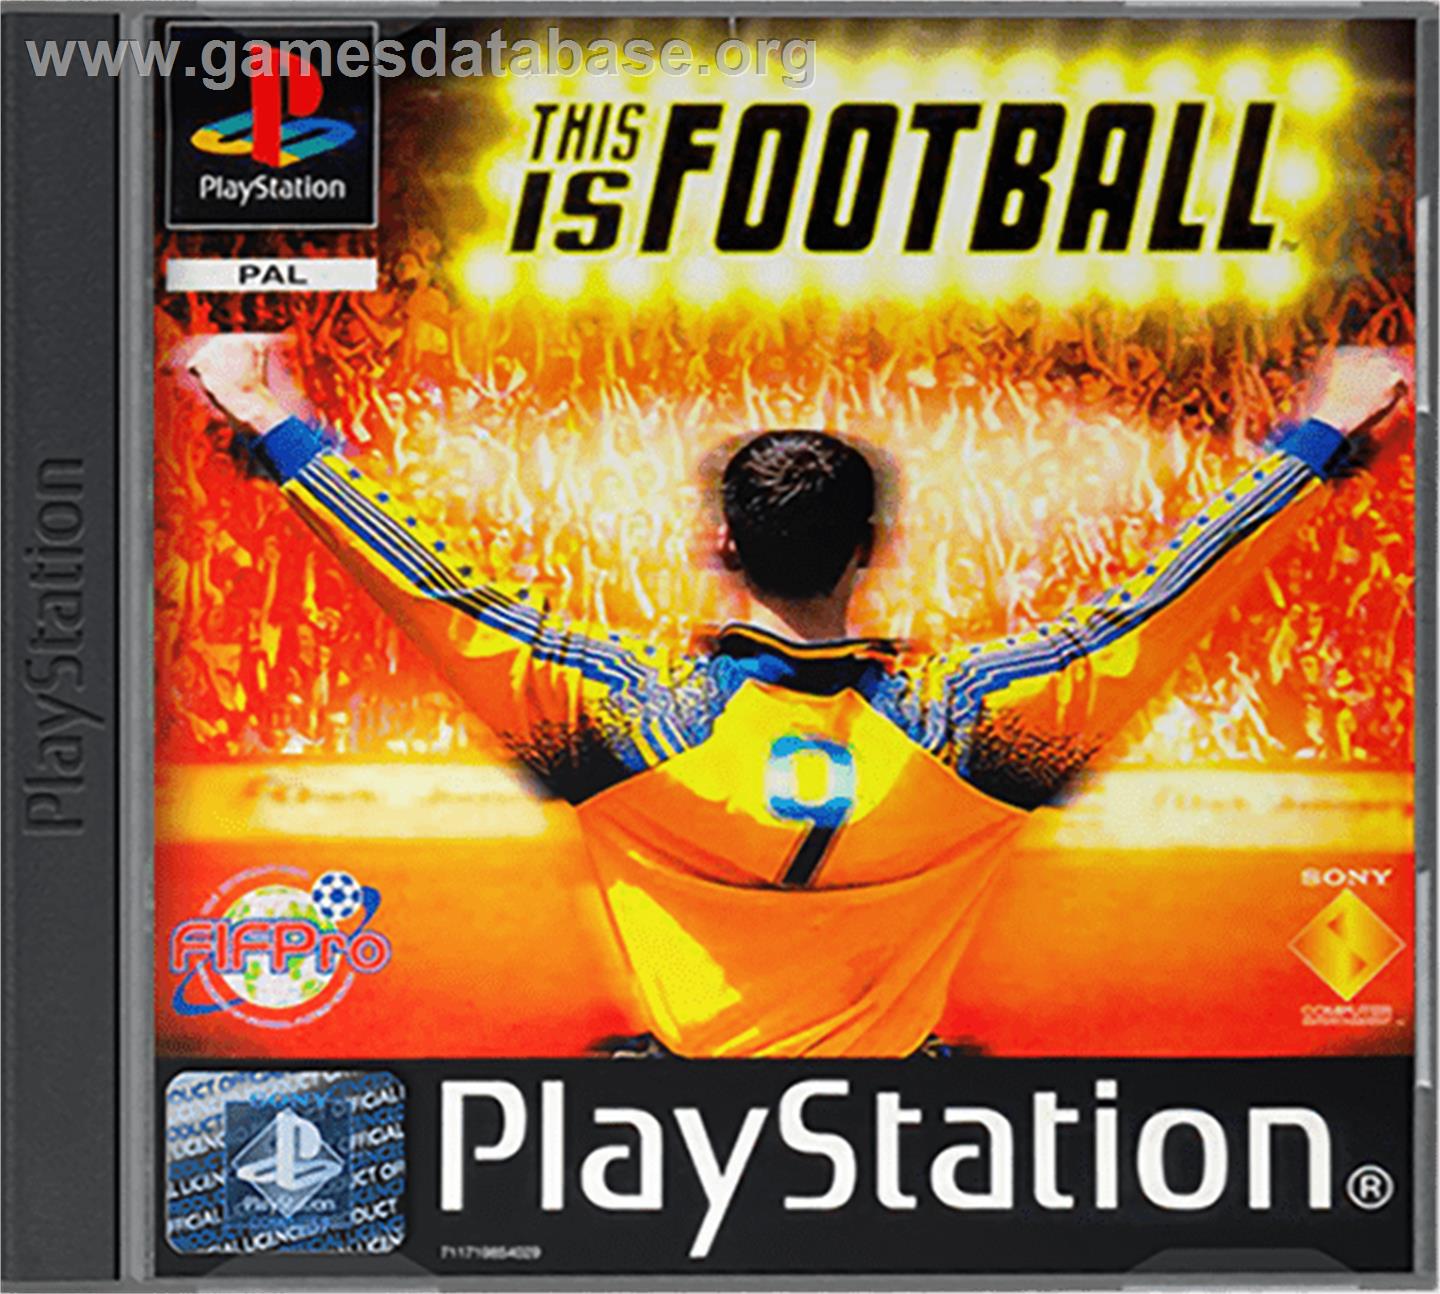 This is Football - Sony Playstation - Artwork - Box